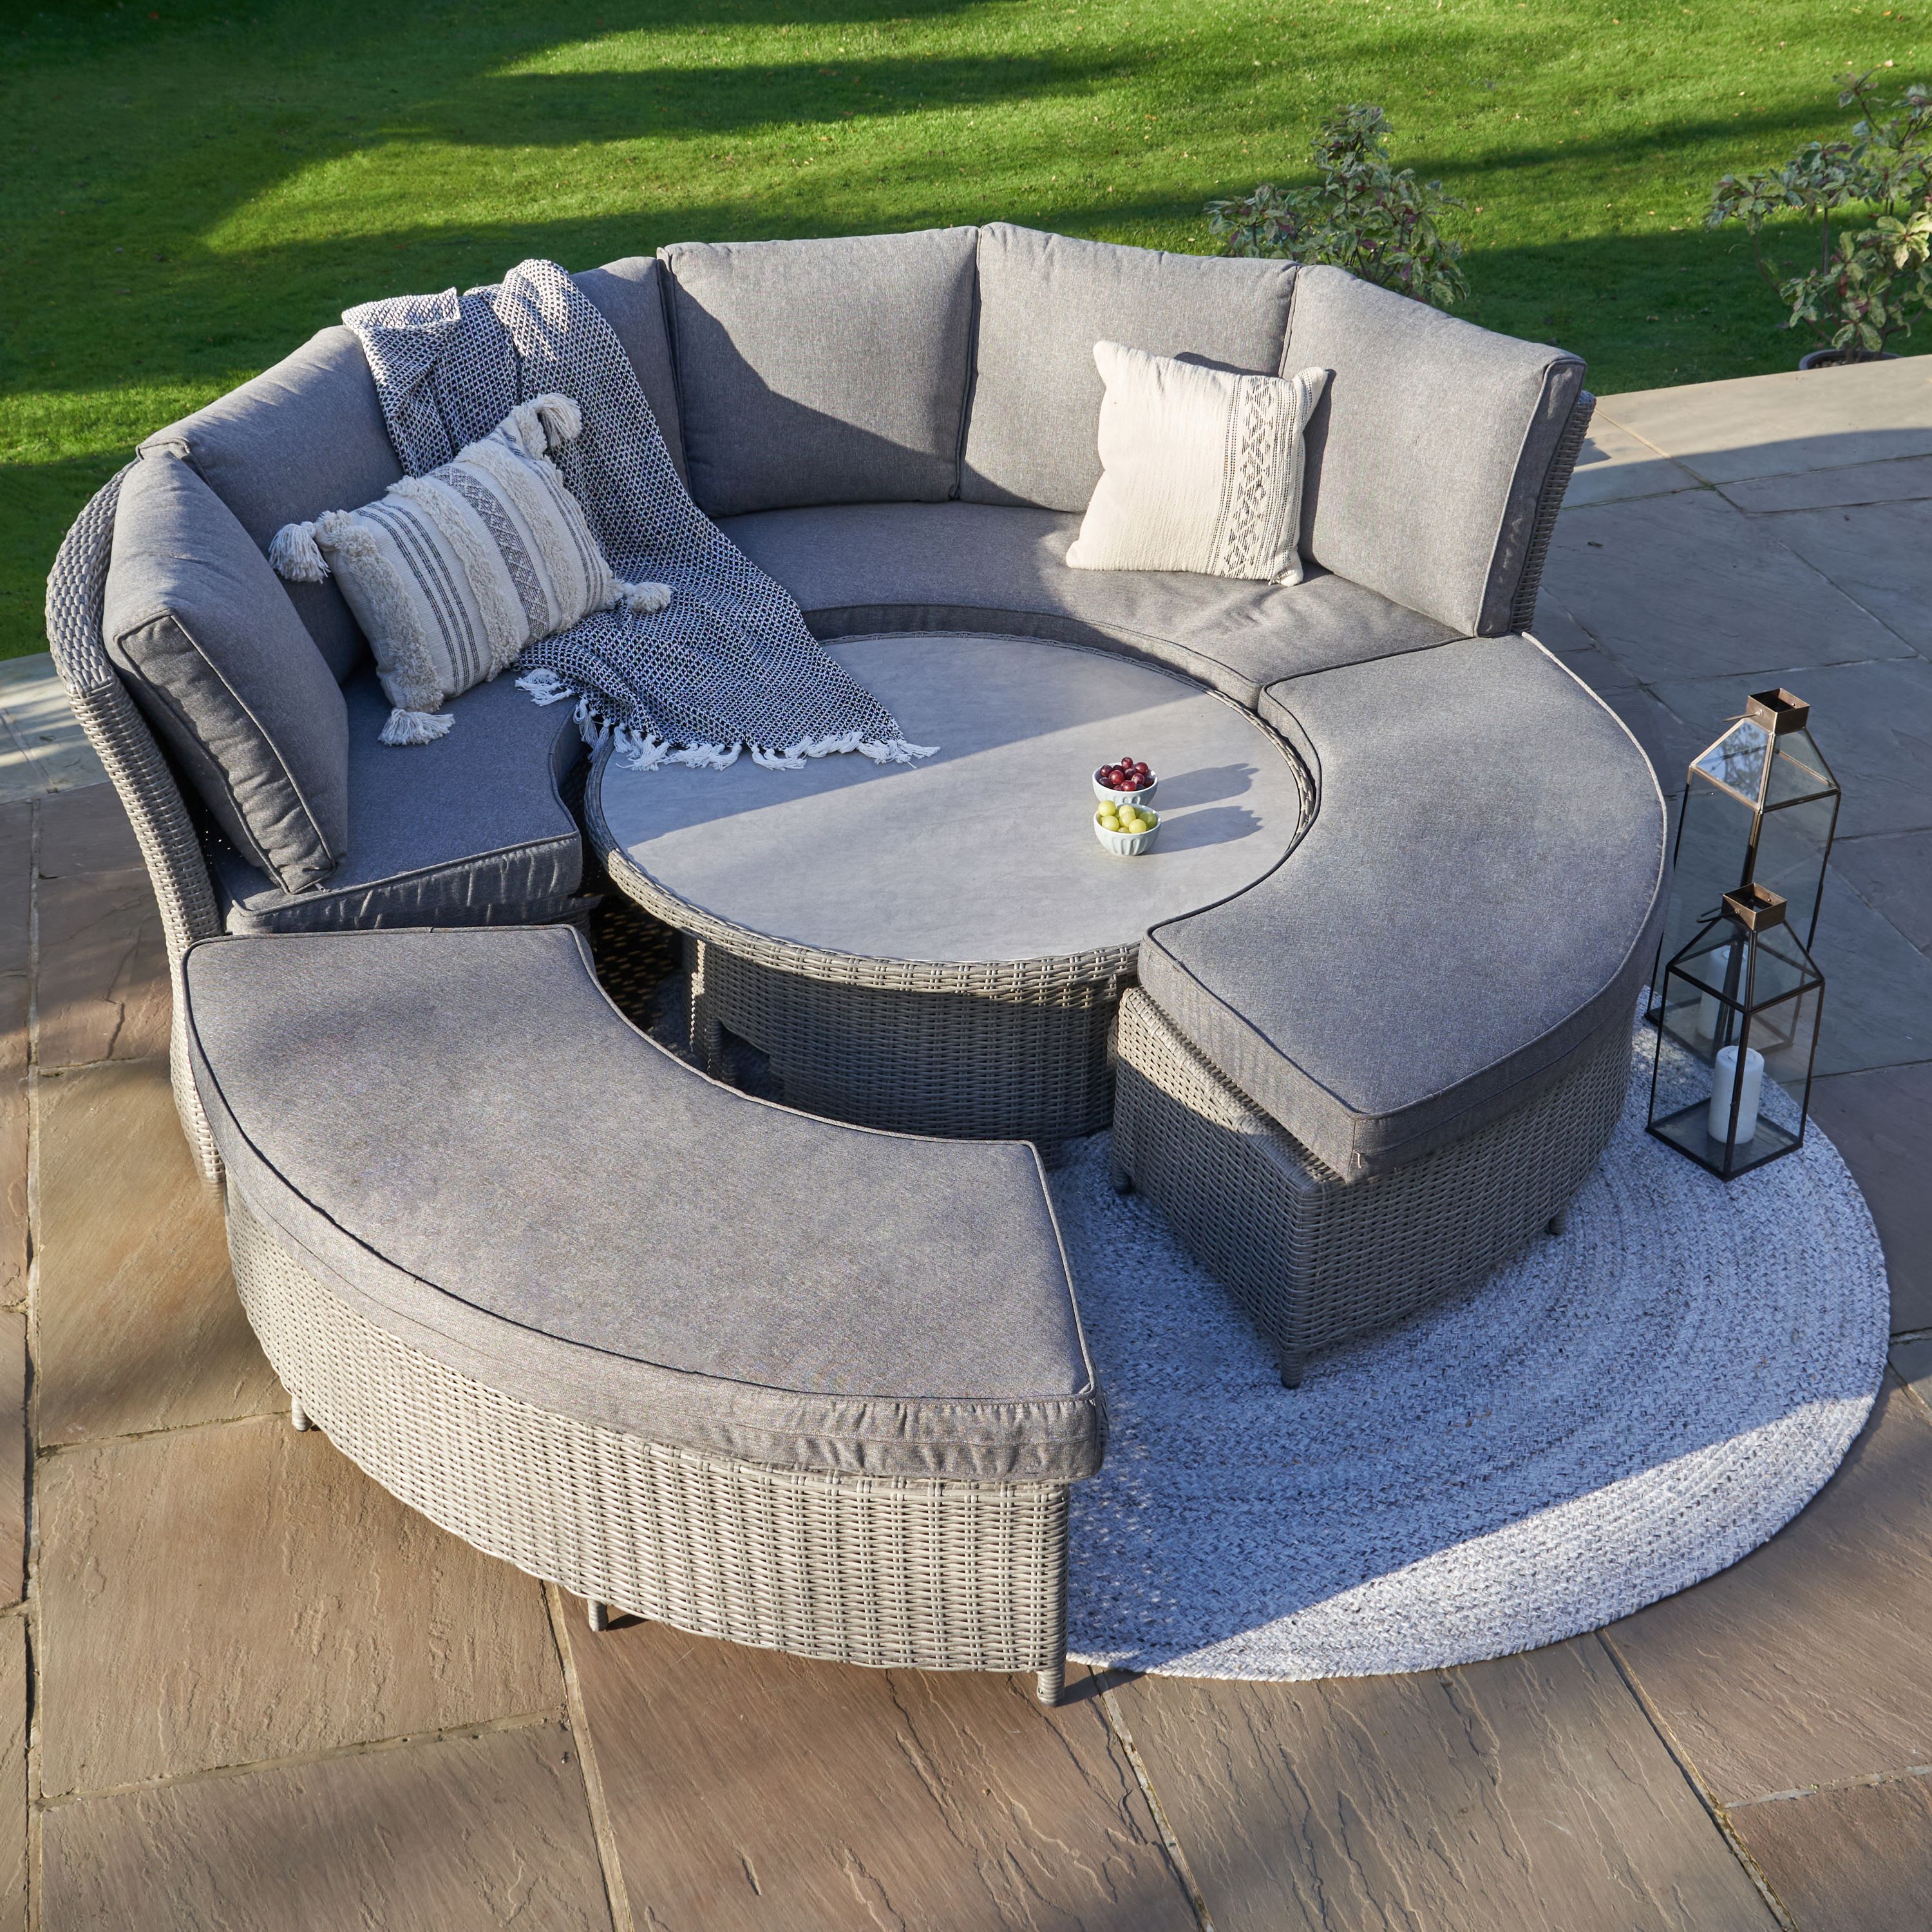 Bermuda Daybed Garden Dining Set With Ceramic Top Stone Grey